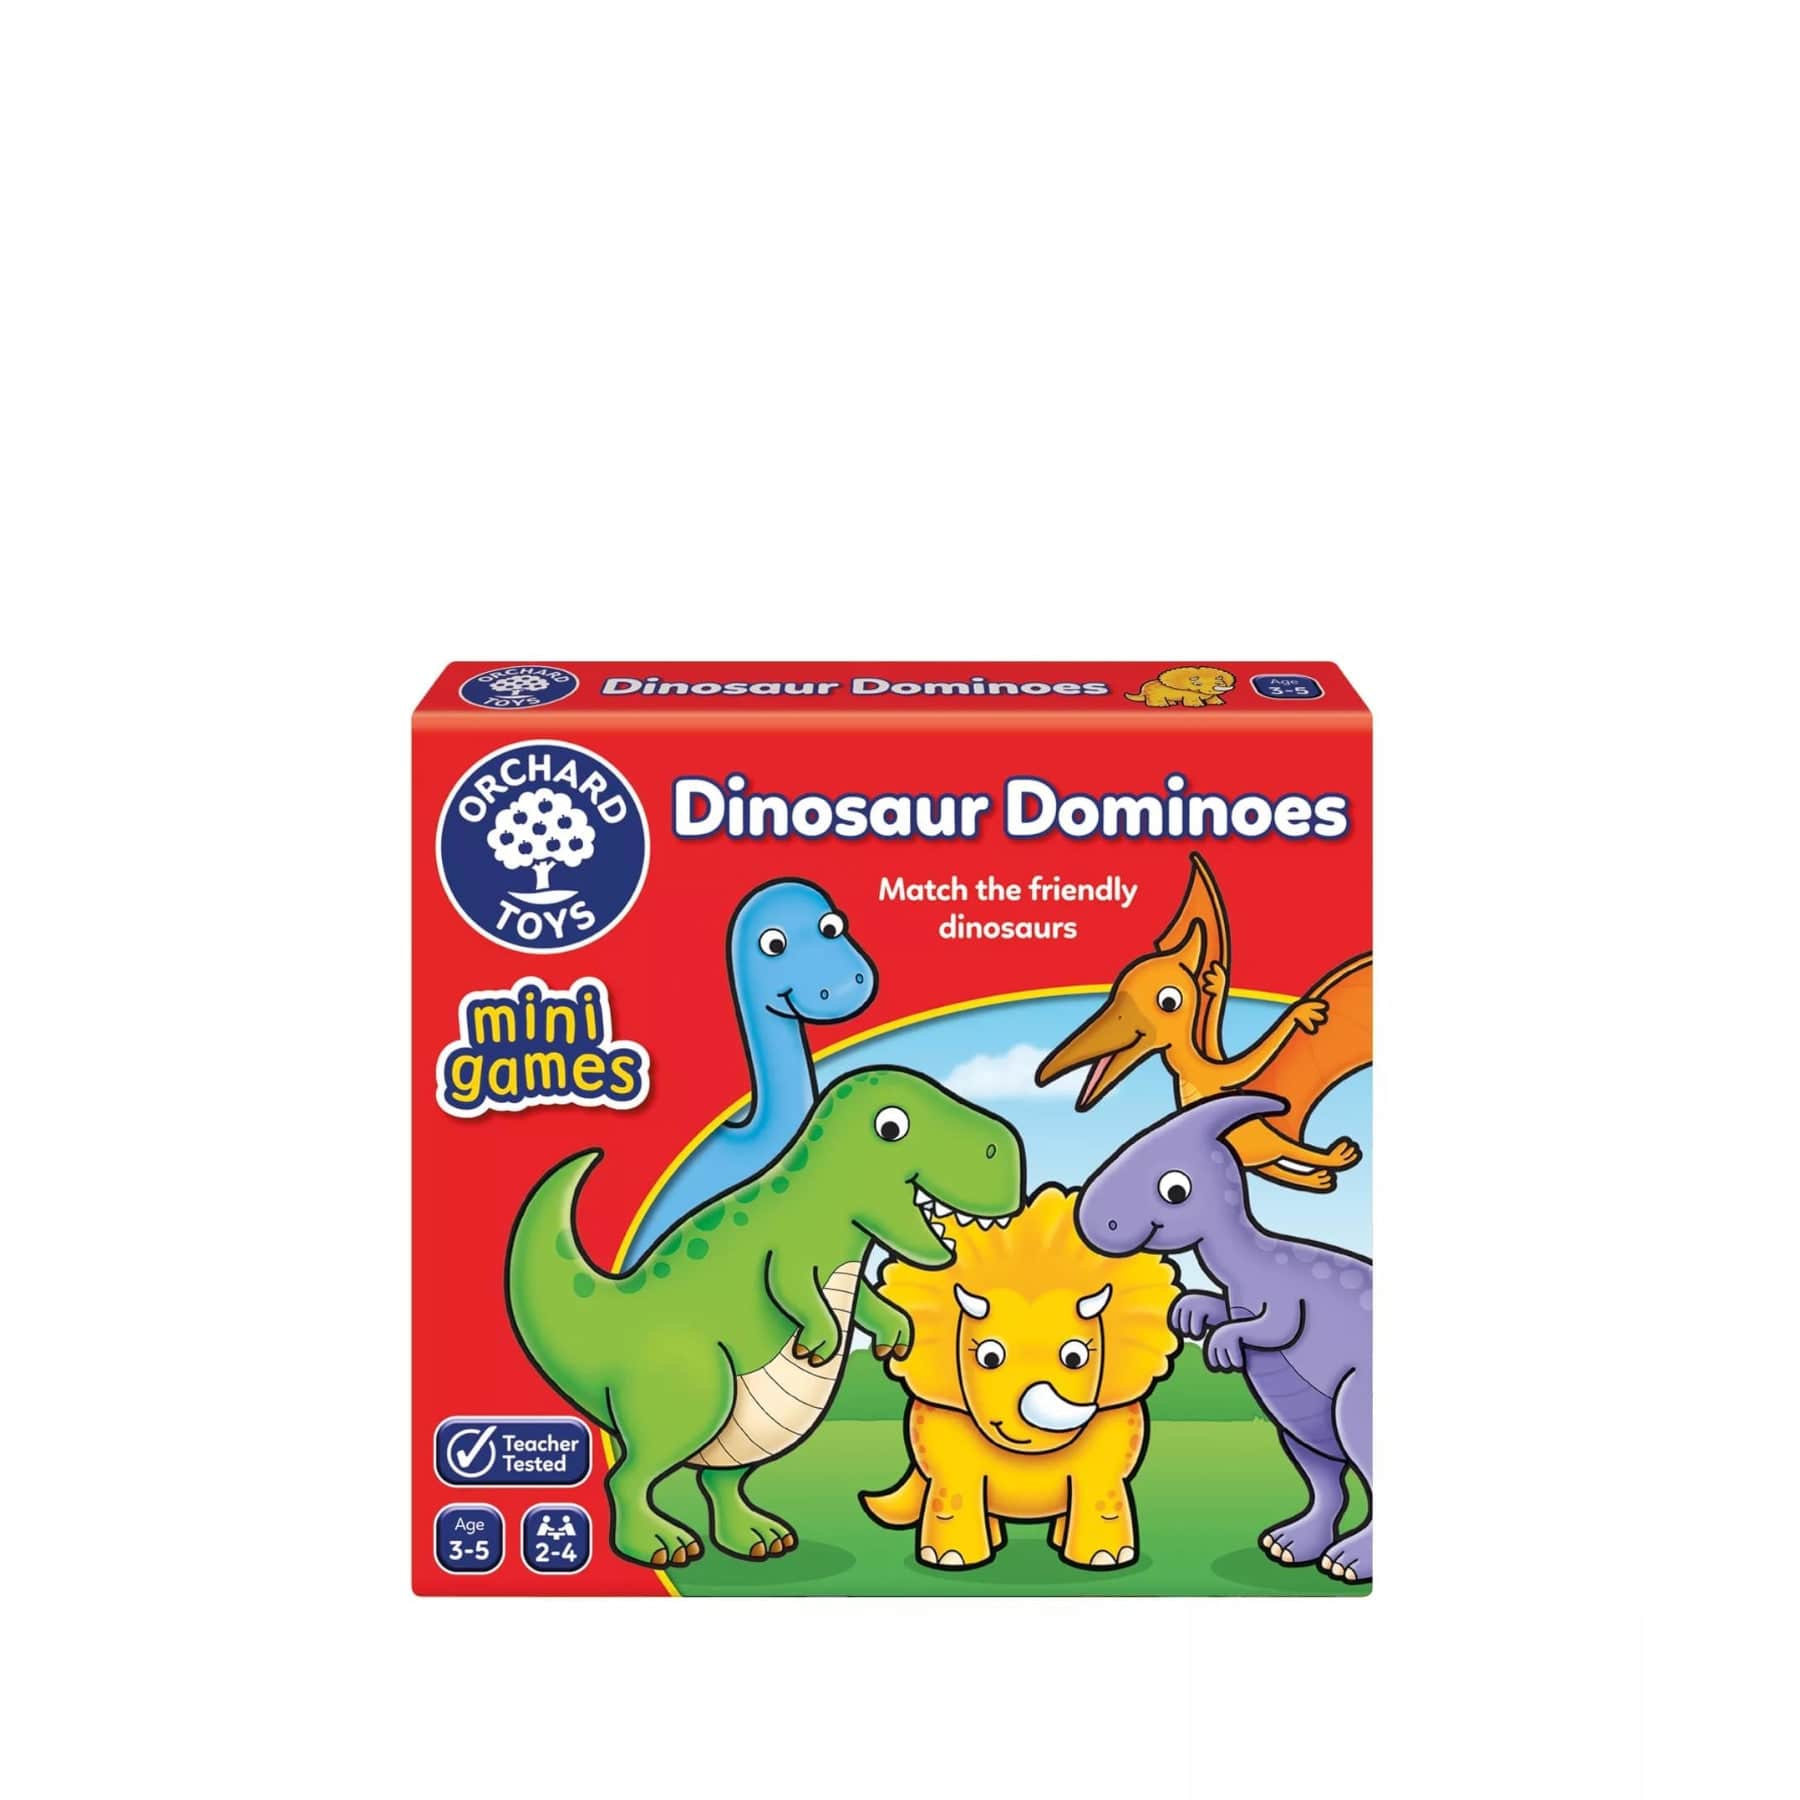 Orchard Toys Dinosaur Dominoes board game for kids, colorful cartoon dinosaurs on game box, children's educational matching game, mini games series, teacher tested, suitable for ages 3-5.